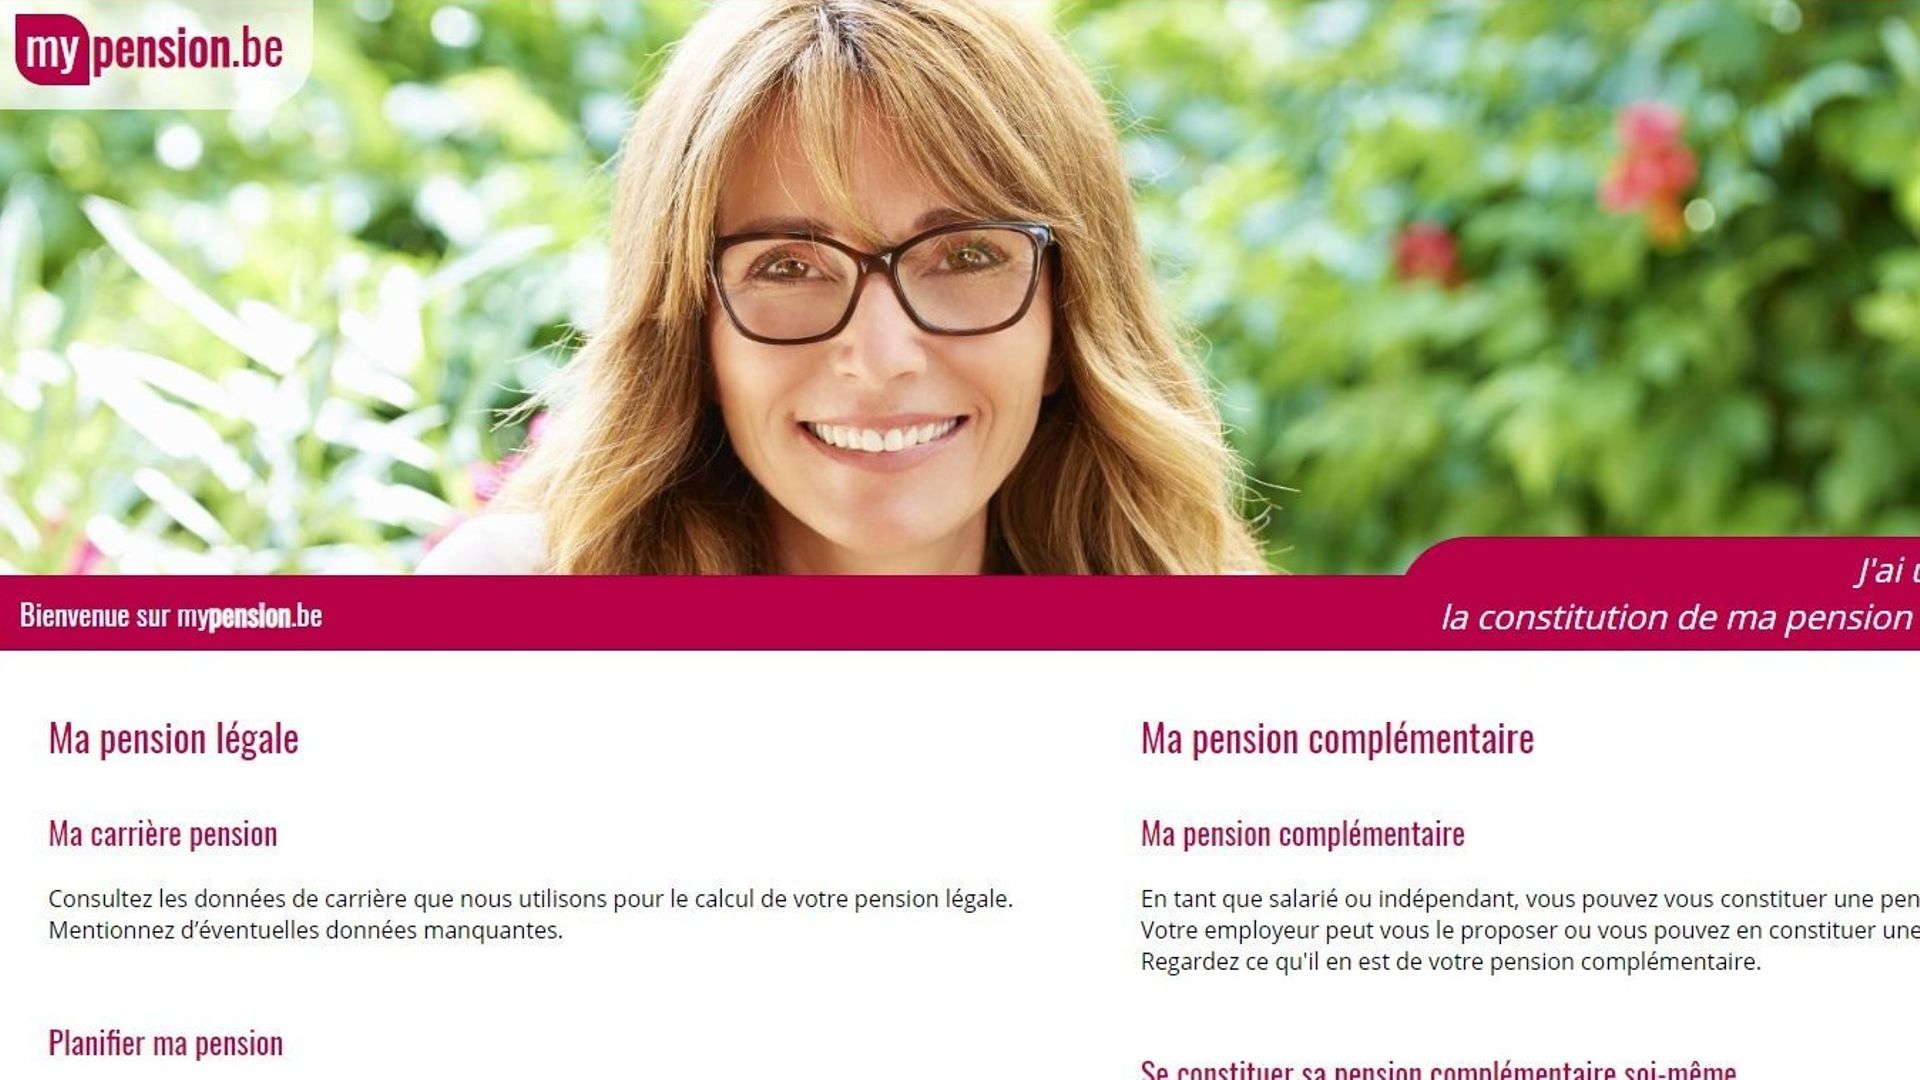 Le site mypension.be